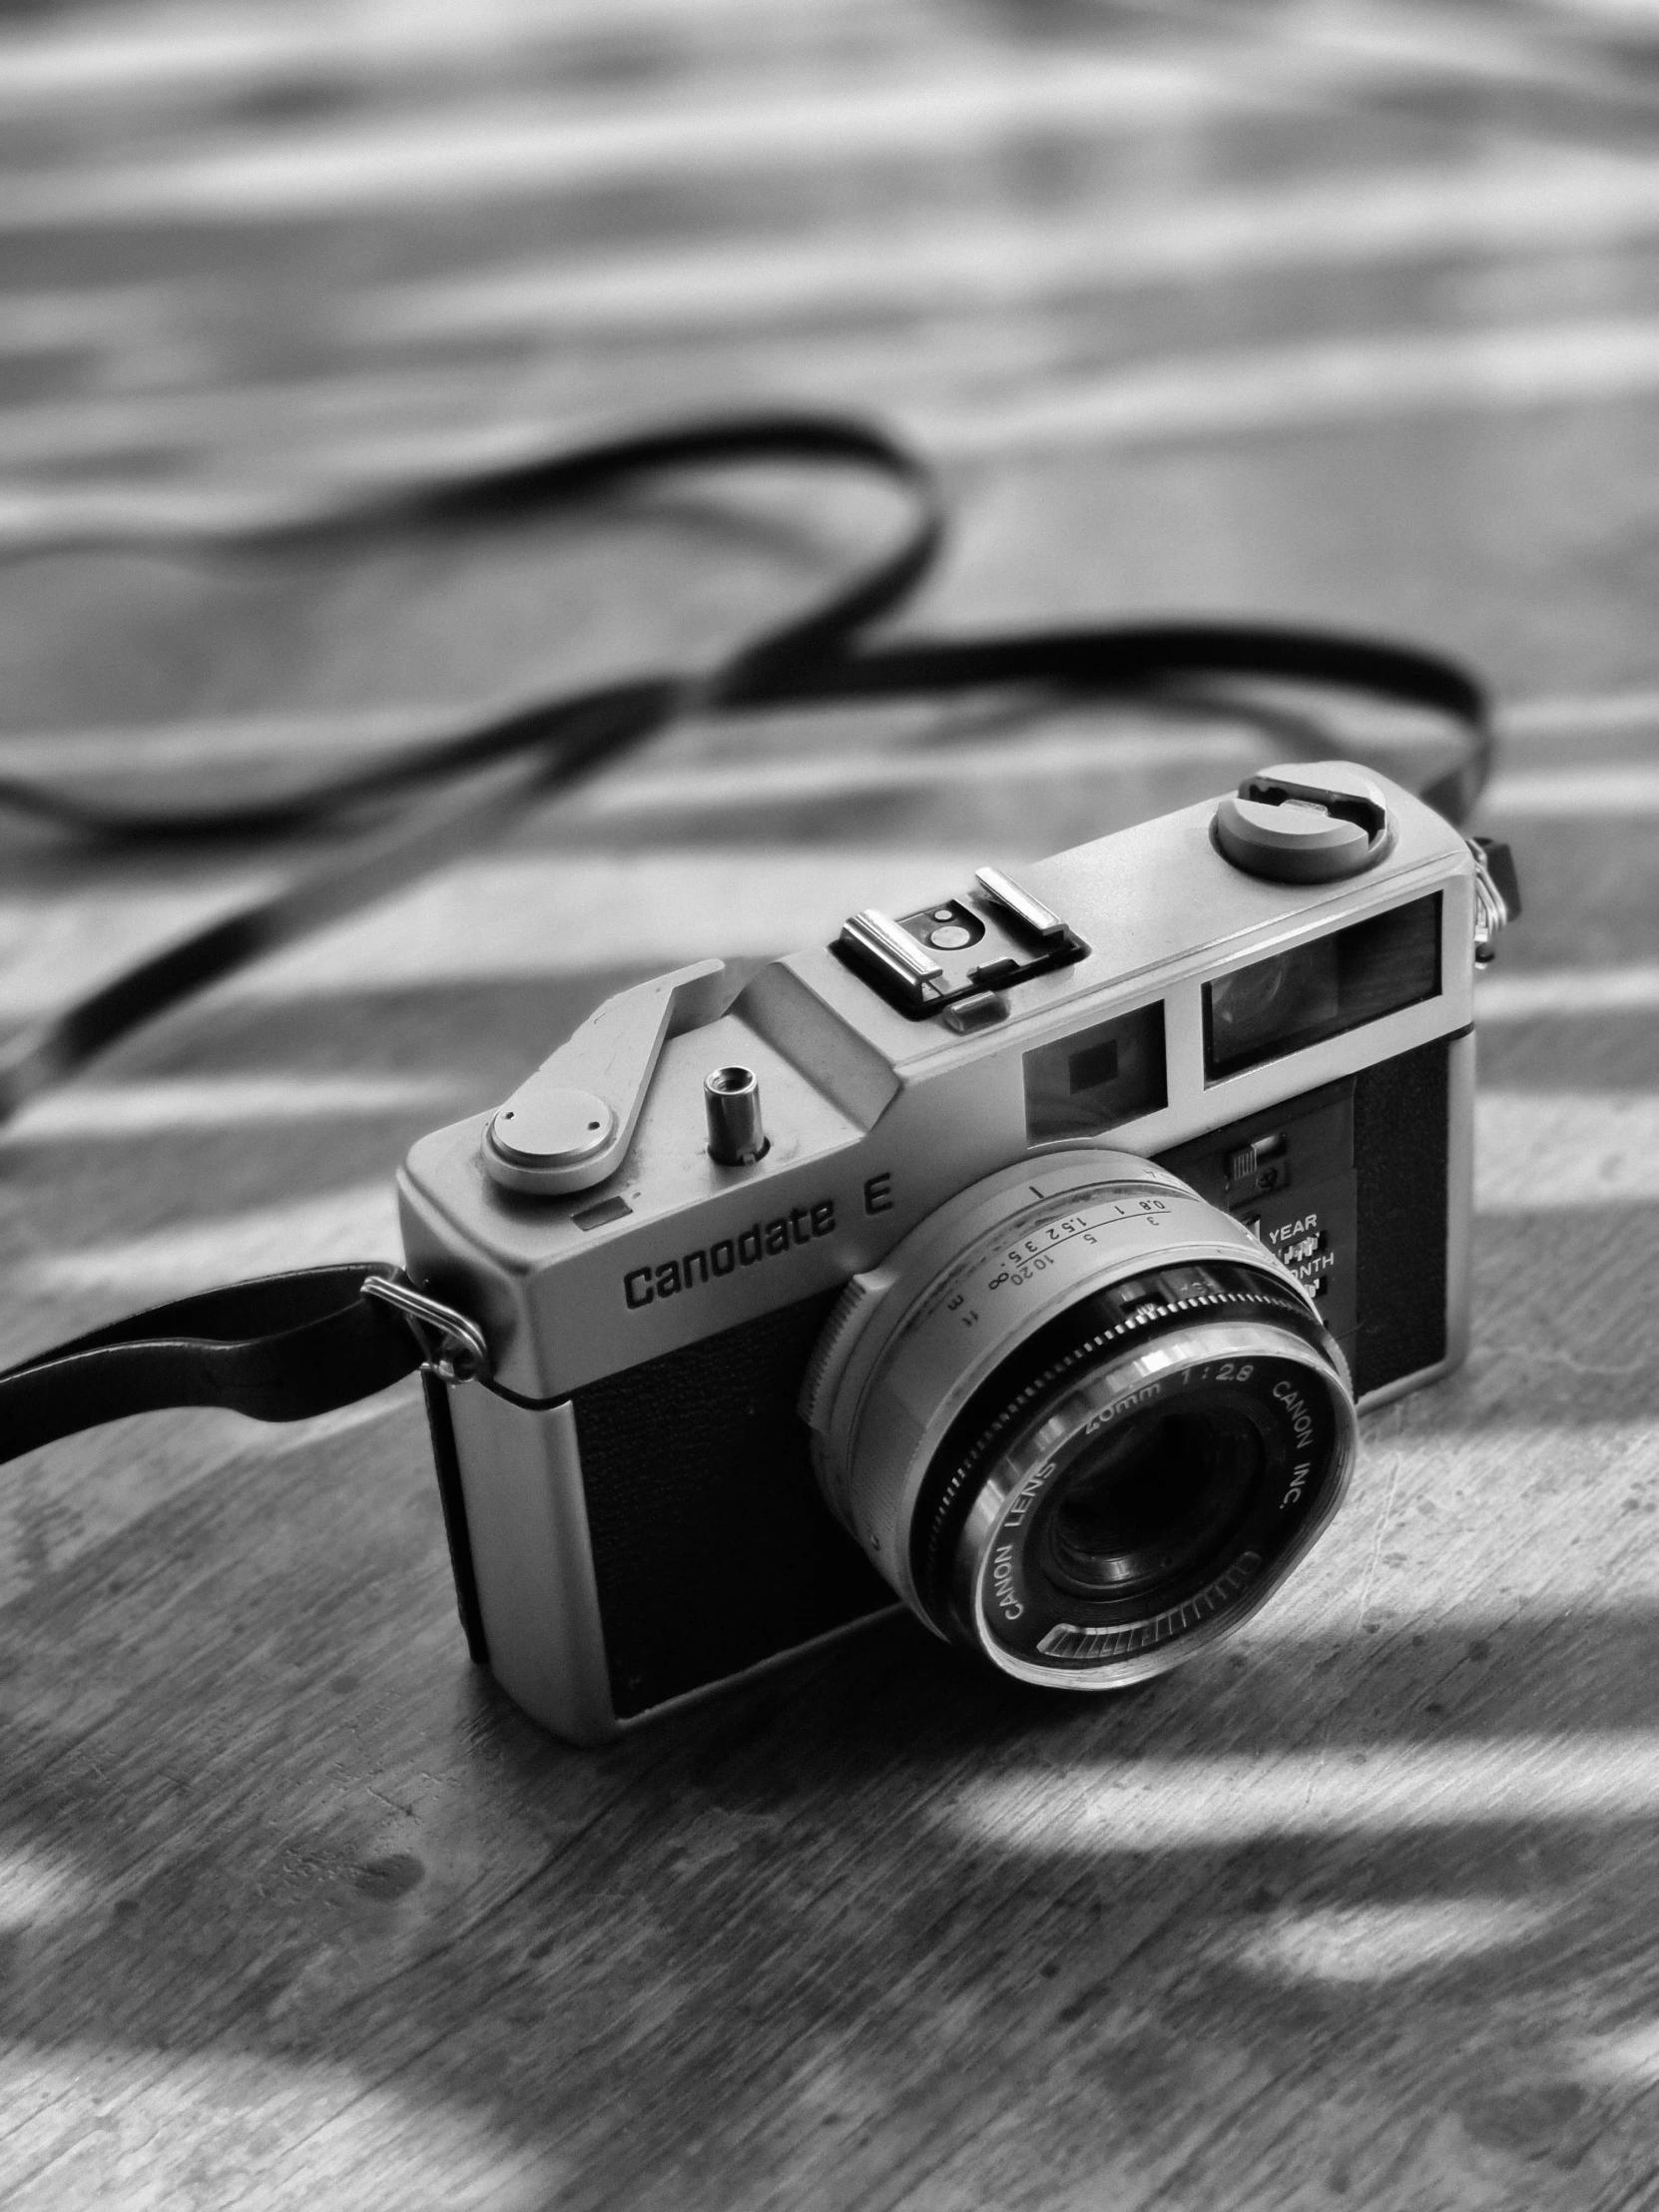 an old camera on a wooden surface and a cable